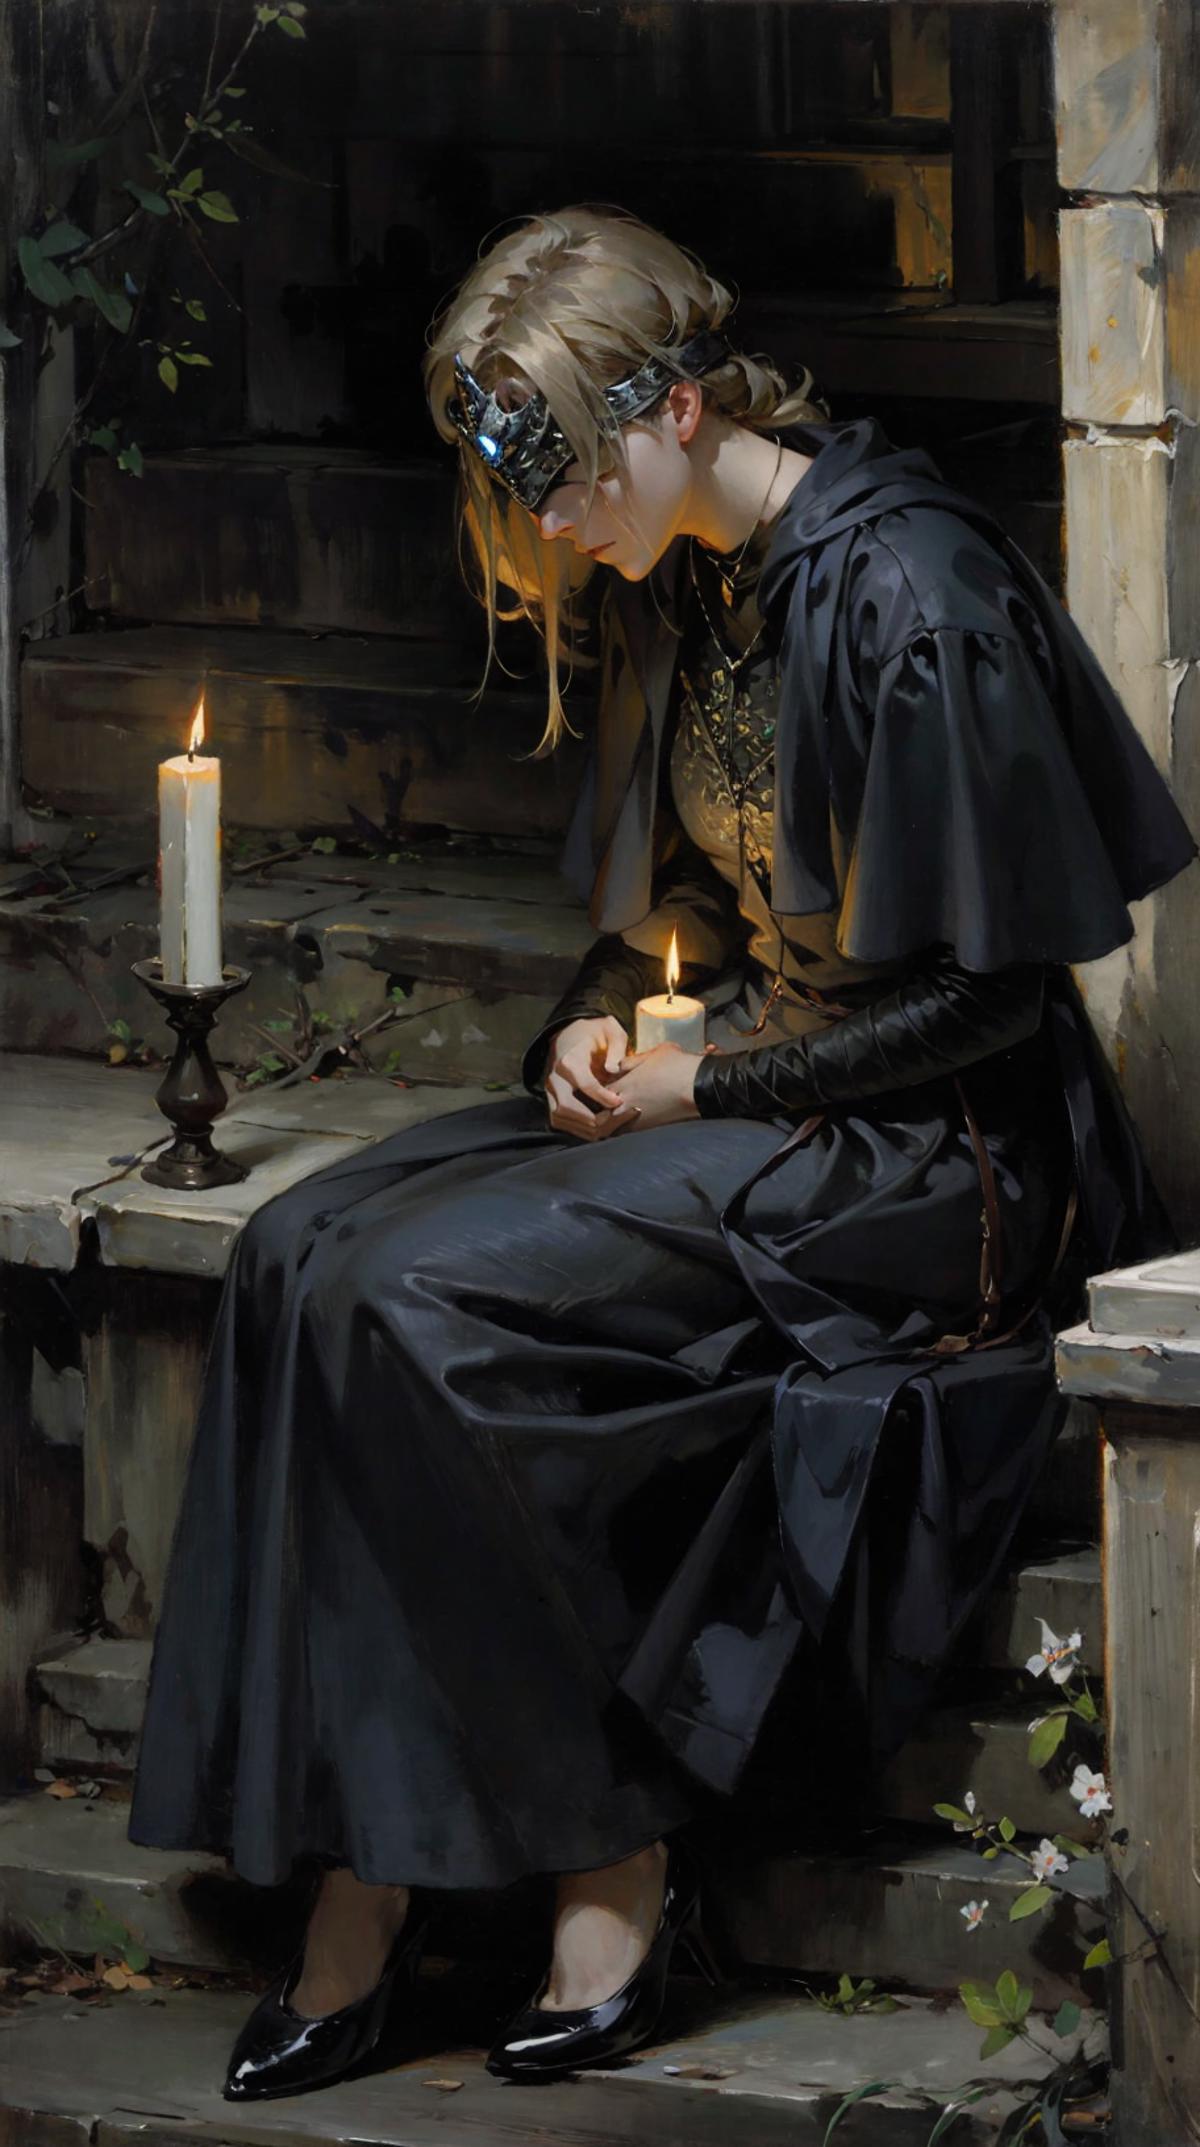 A woman in a black dress sitting on a bench holding a candle.